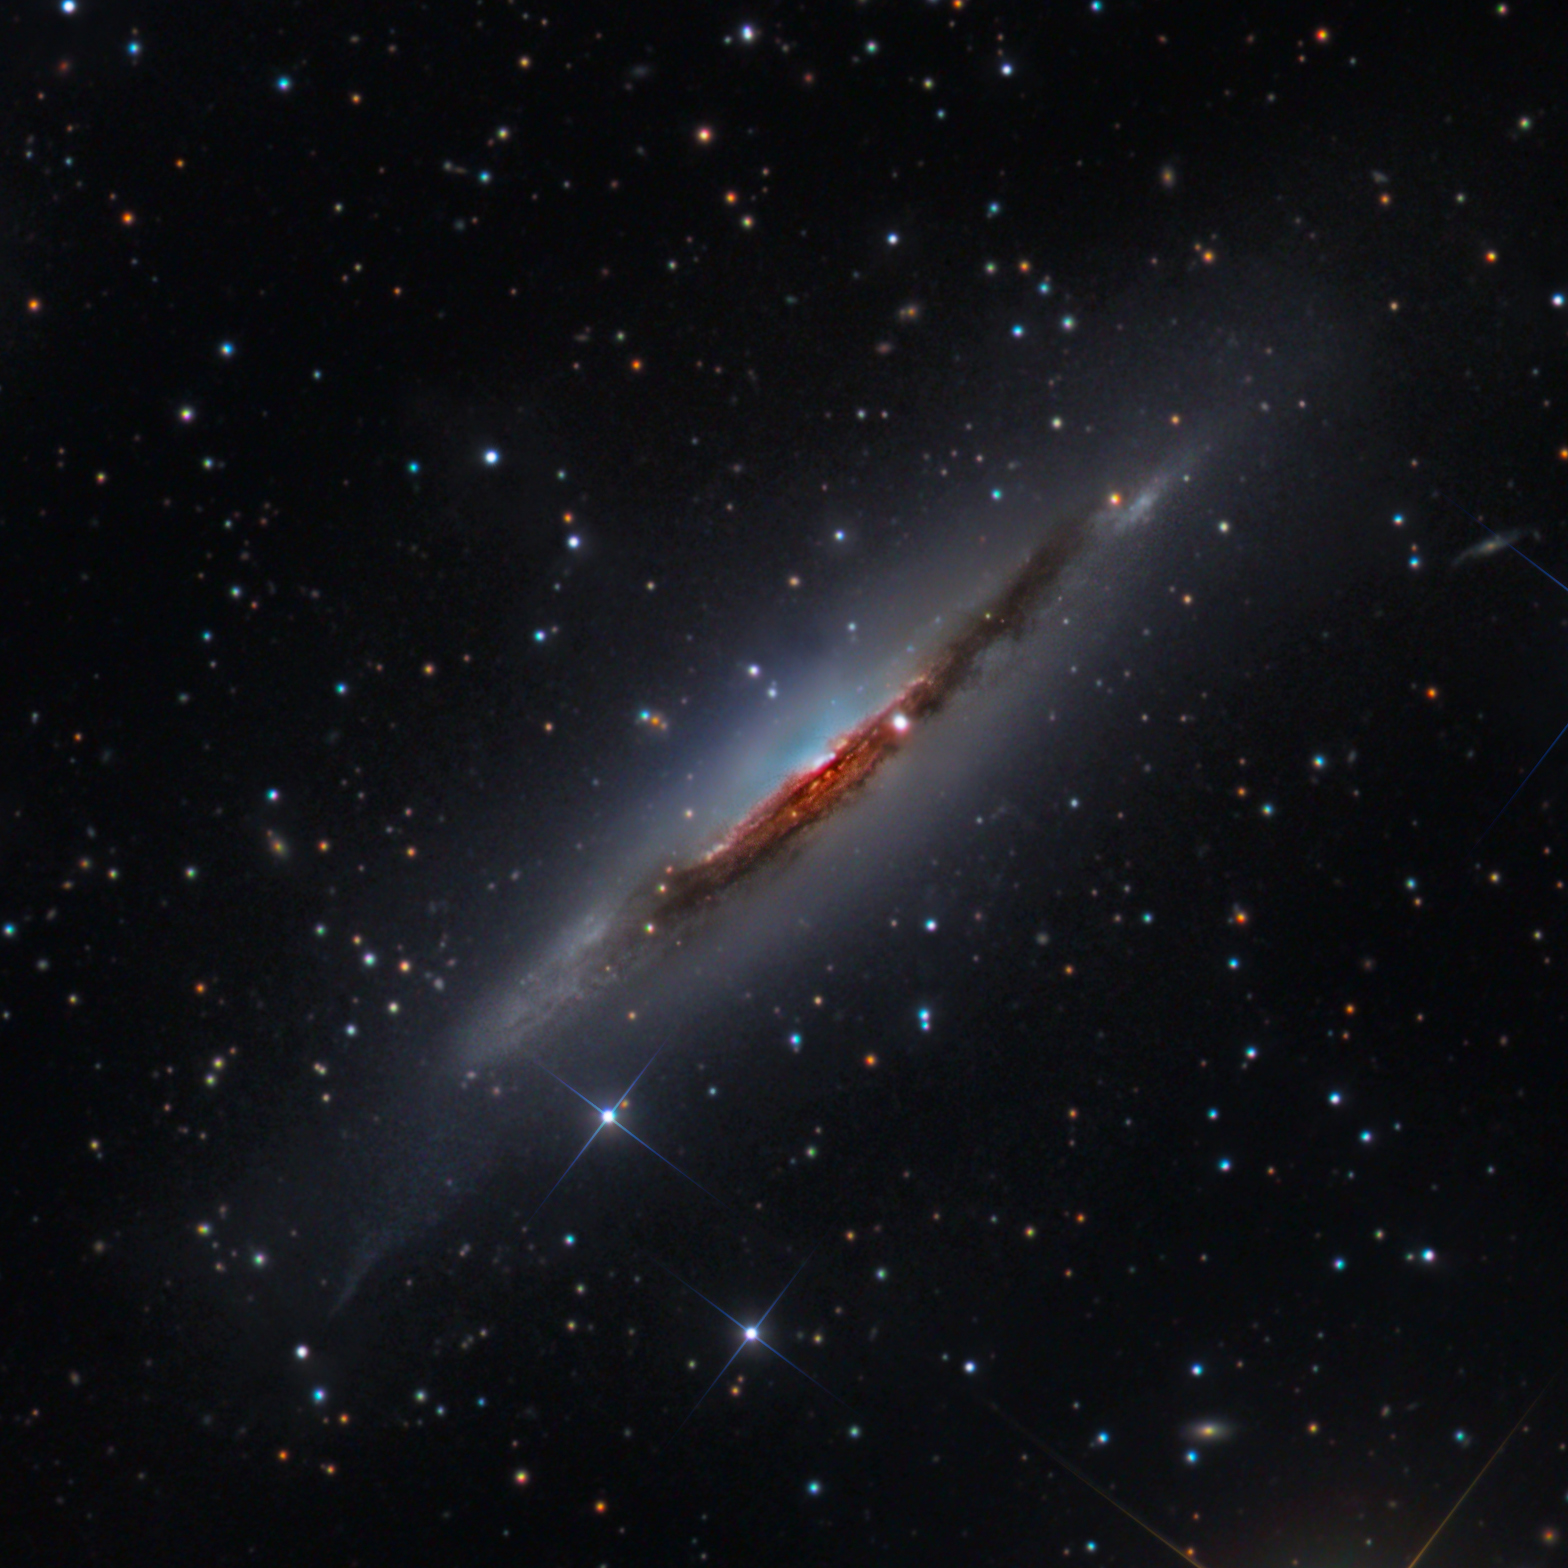 NGC 3717 in Hydra